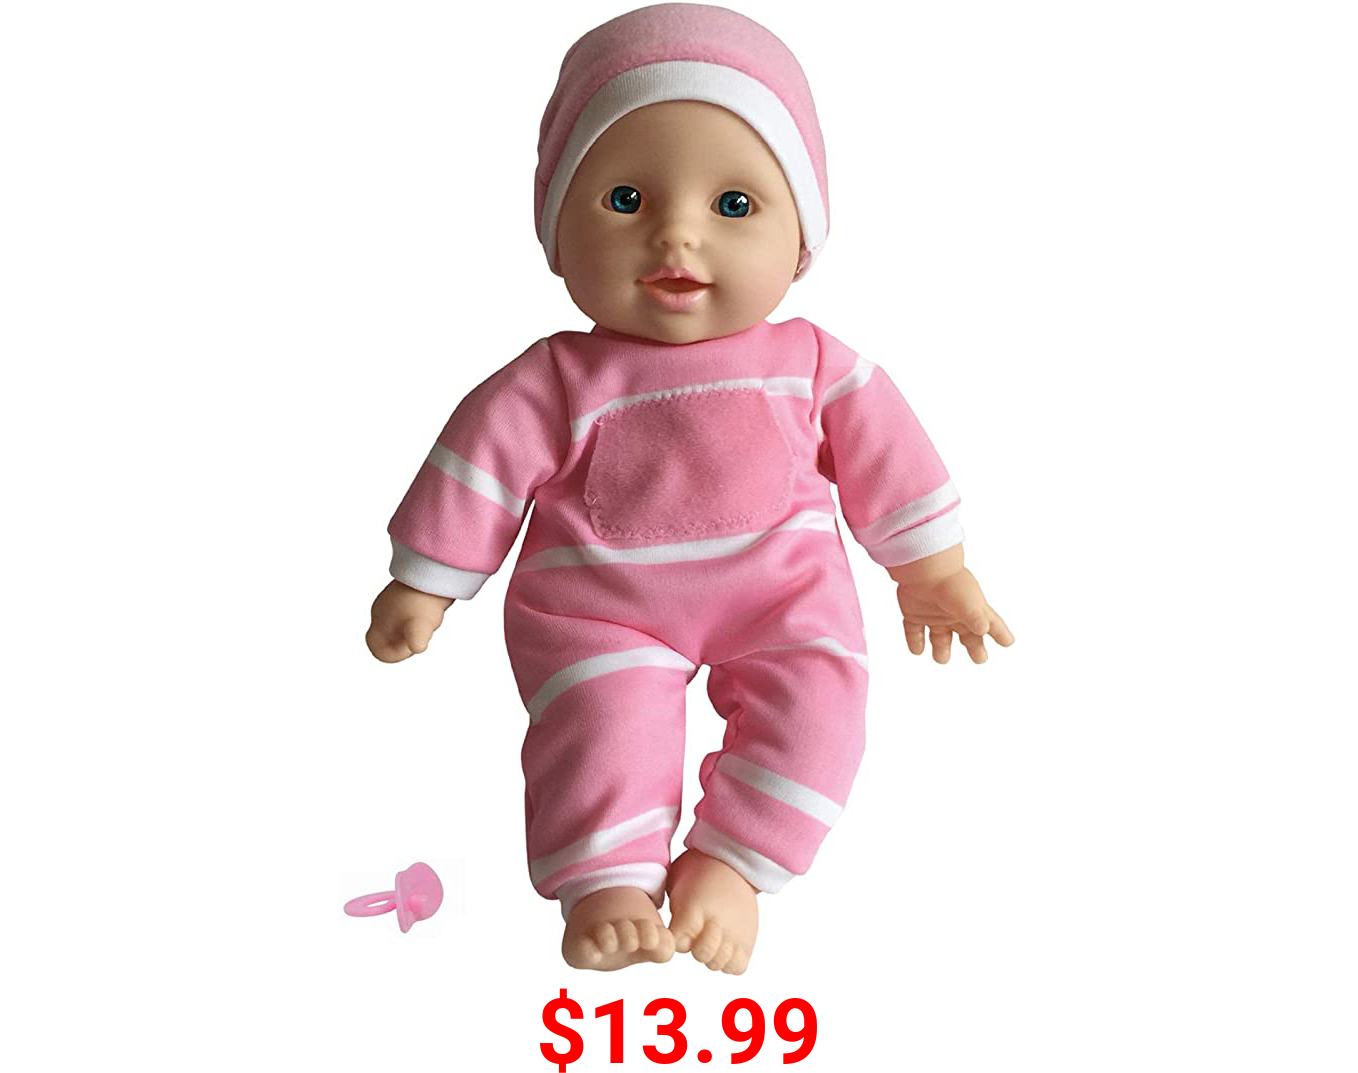 The New York Doll Collection 11 inch Soft Body Doll in Gift Box - 11"" Baby Doll (Caucasian)